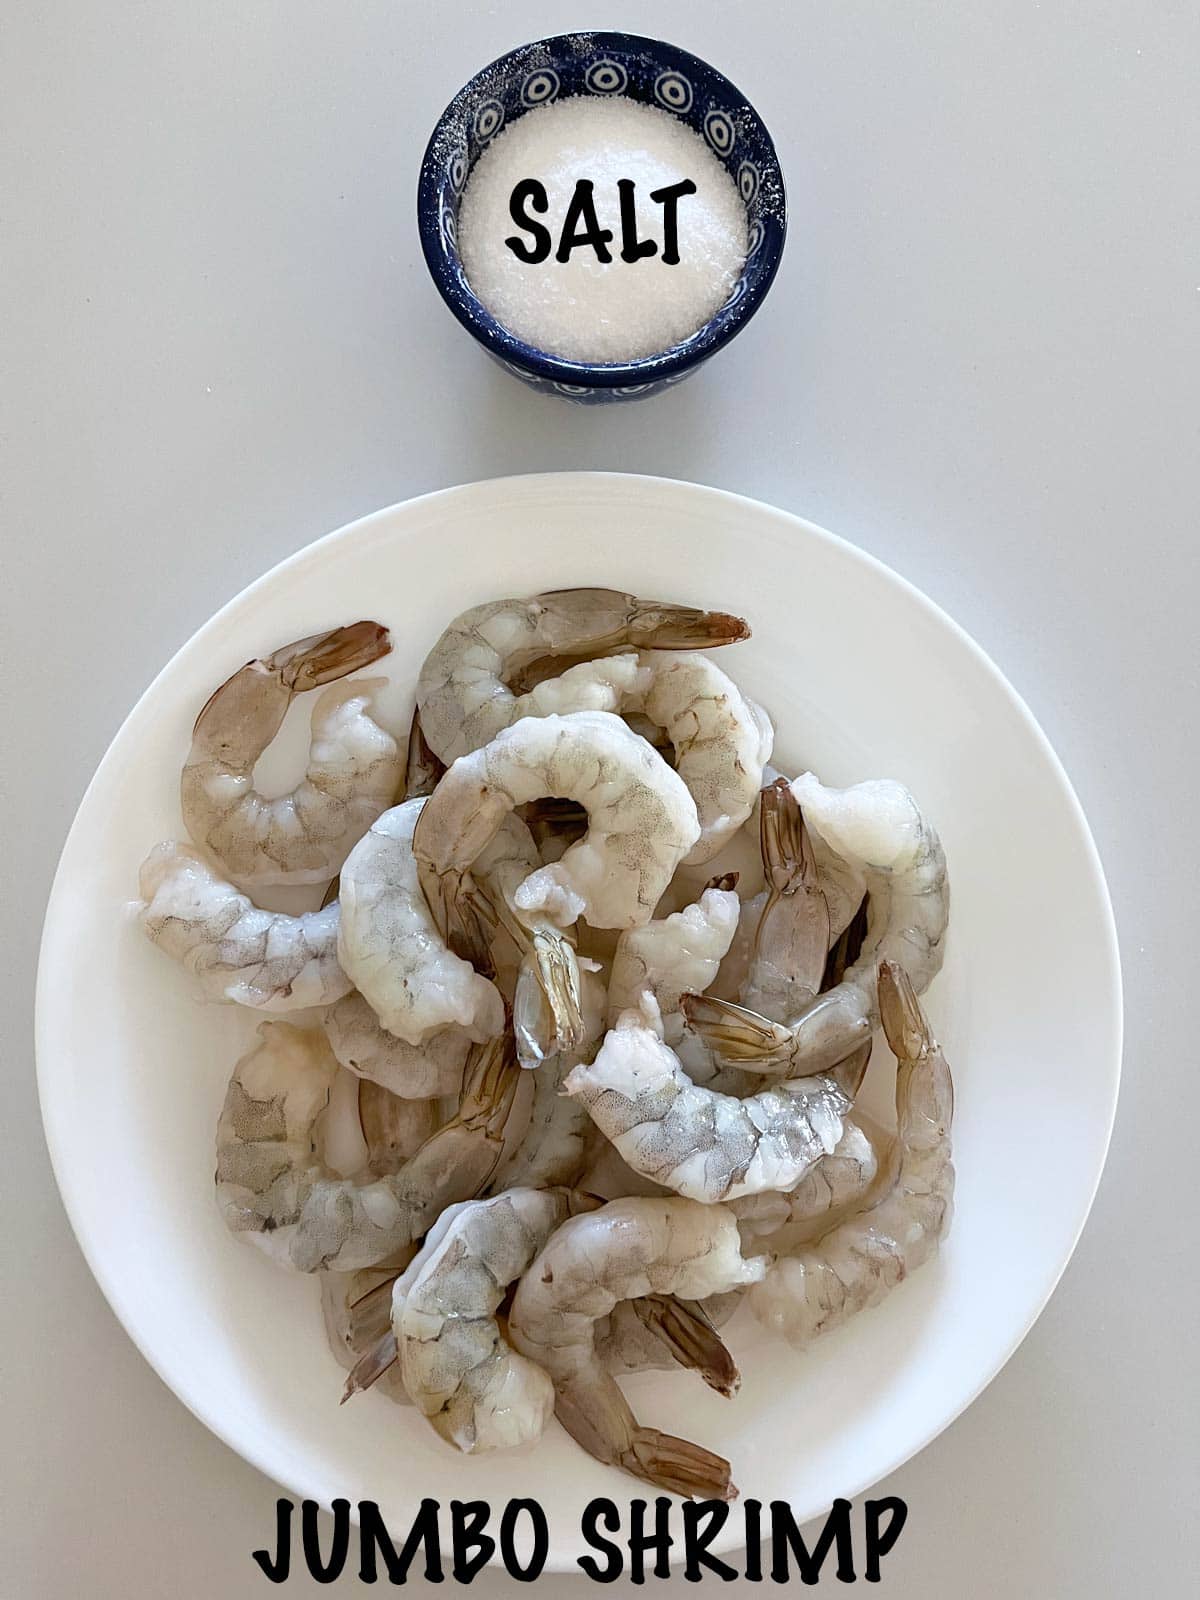 The ingredients needed for boiling shrimp.